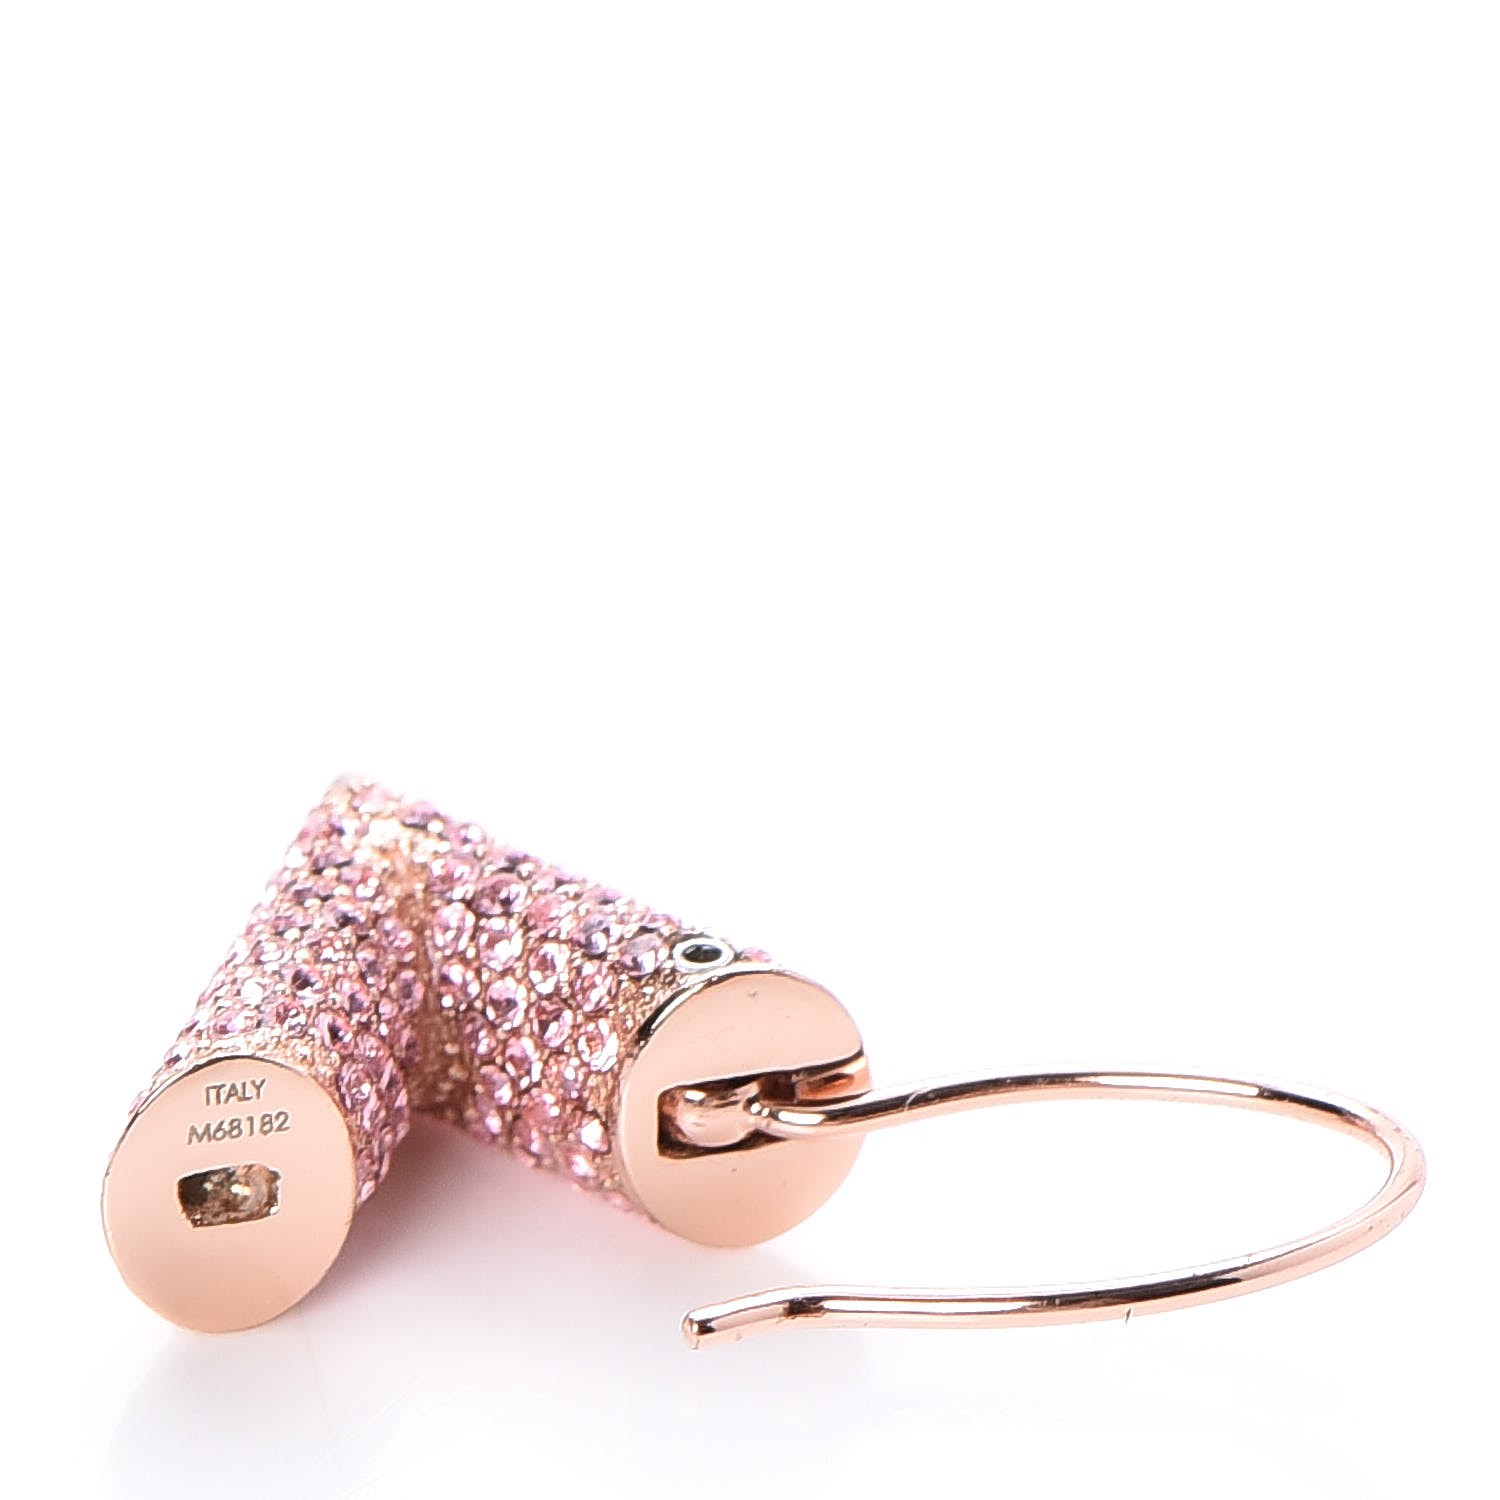 LOUIS VUITTON Crystal Essential V Strass Earrings Pink Gold 421152